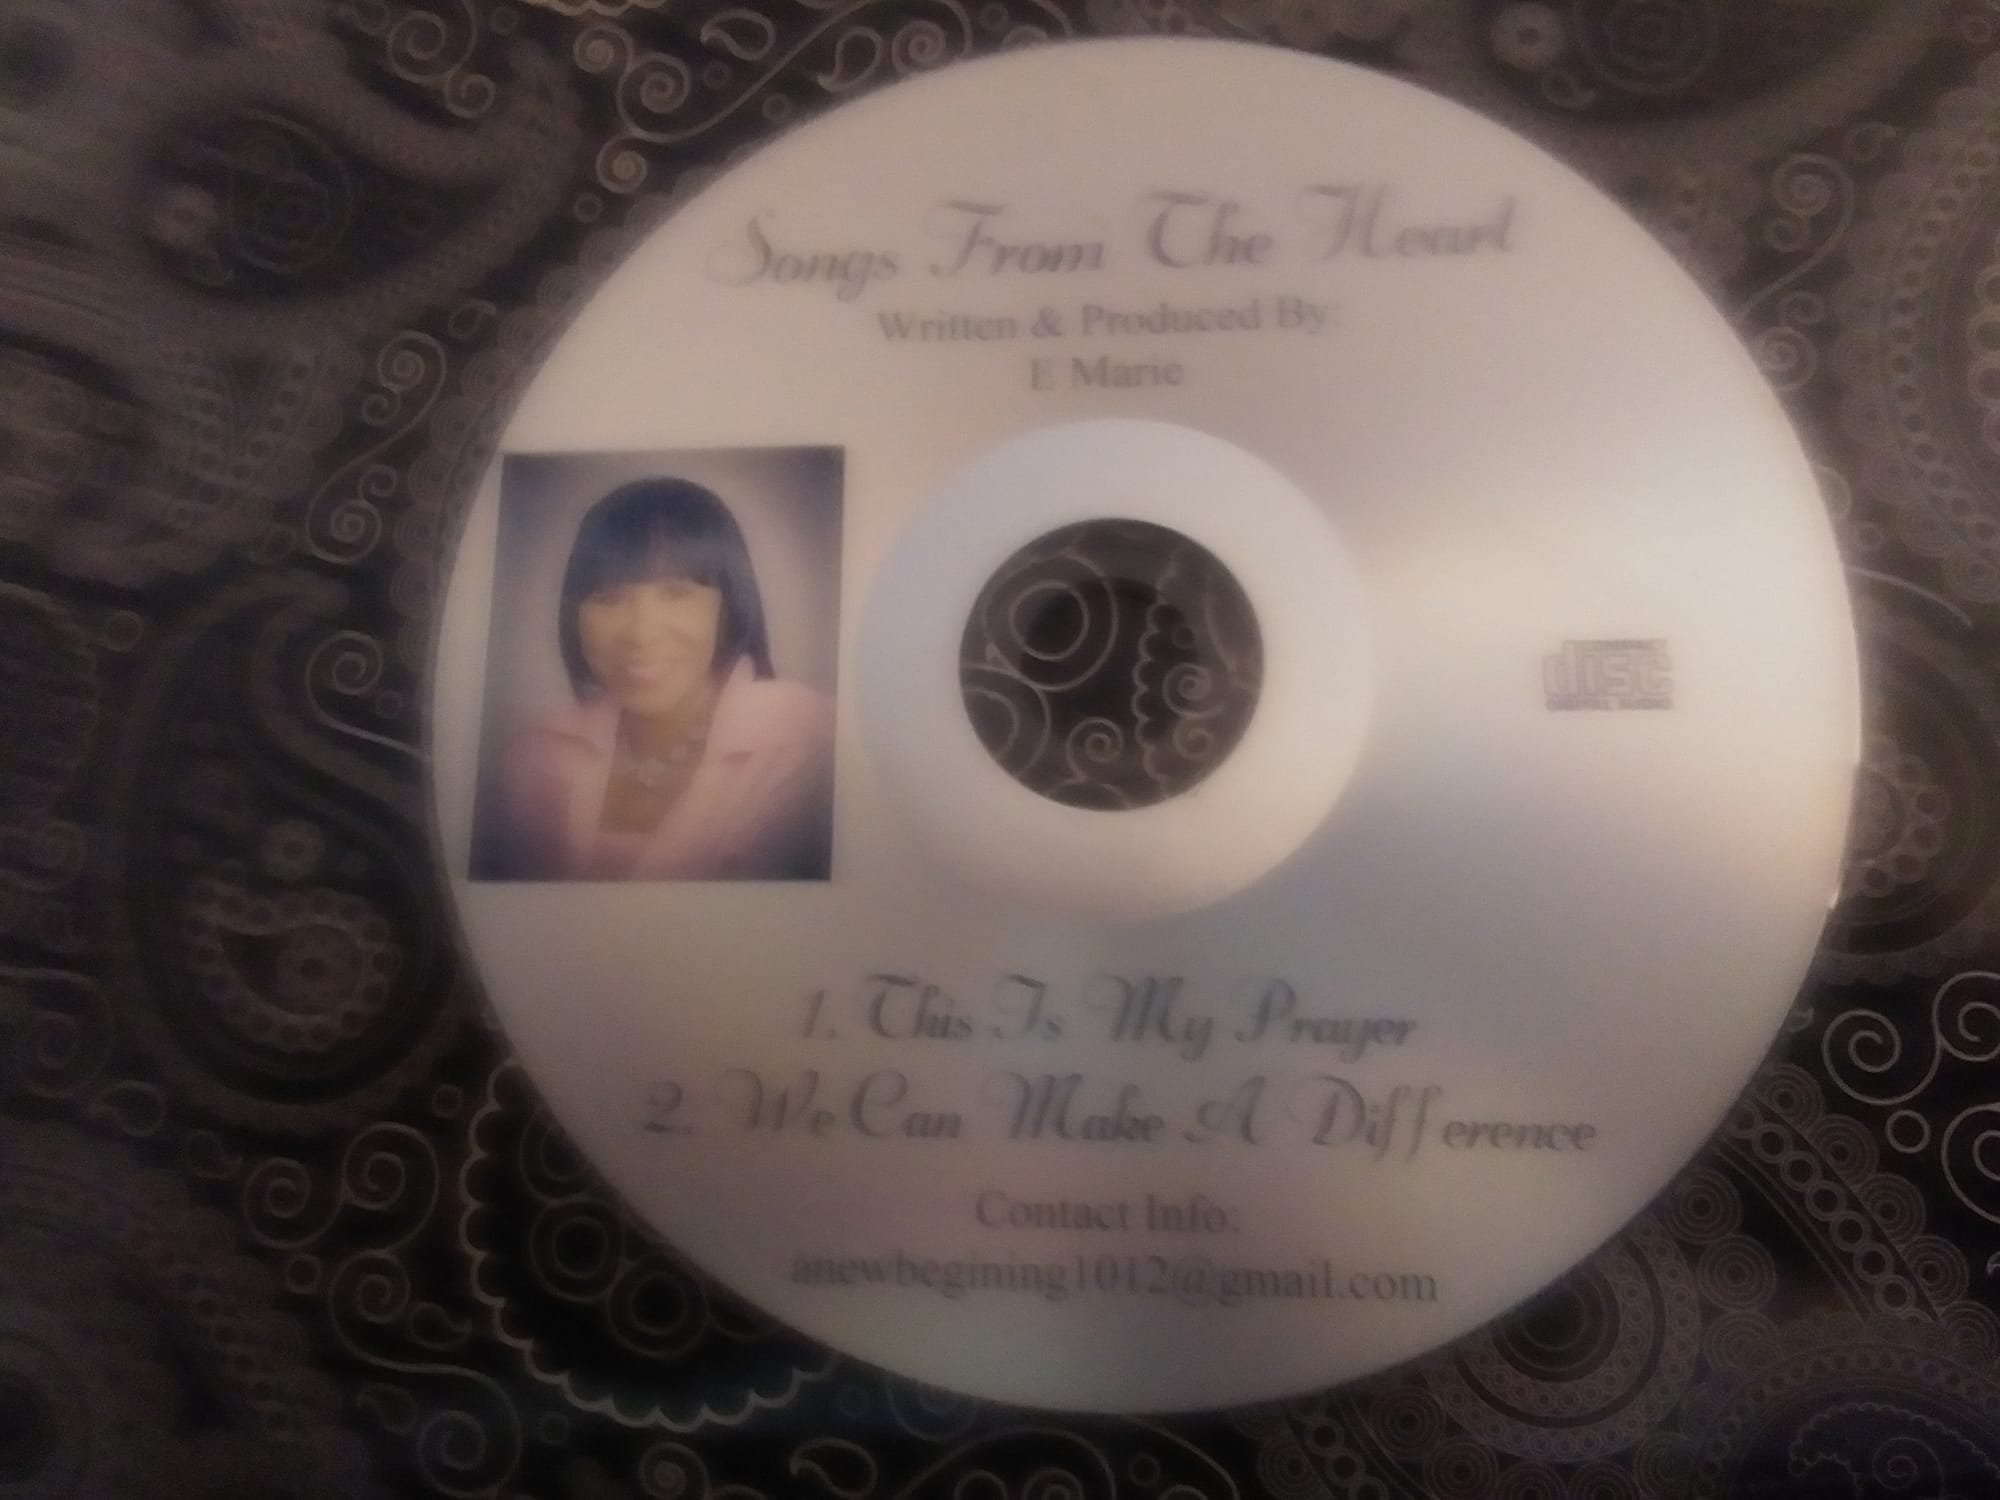 THIS IS THE CD FROM OUR FEATURED GOSPEL ARTIST WHO IS A REAL GOOD FRIEND OF OUR CEO FEATURED IN UPPER PHOTO WITH S. E. White